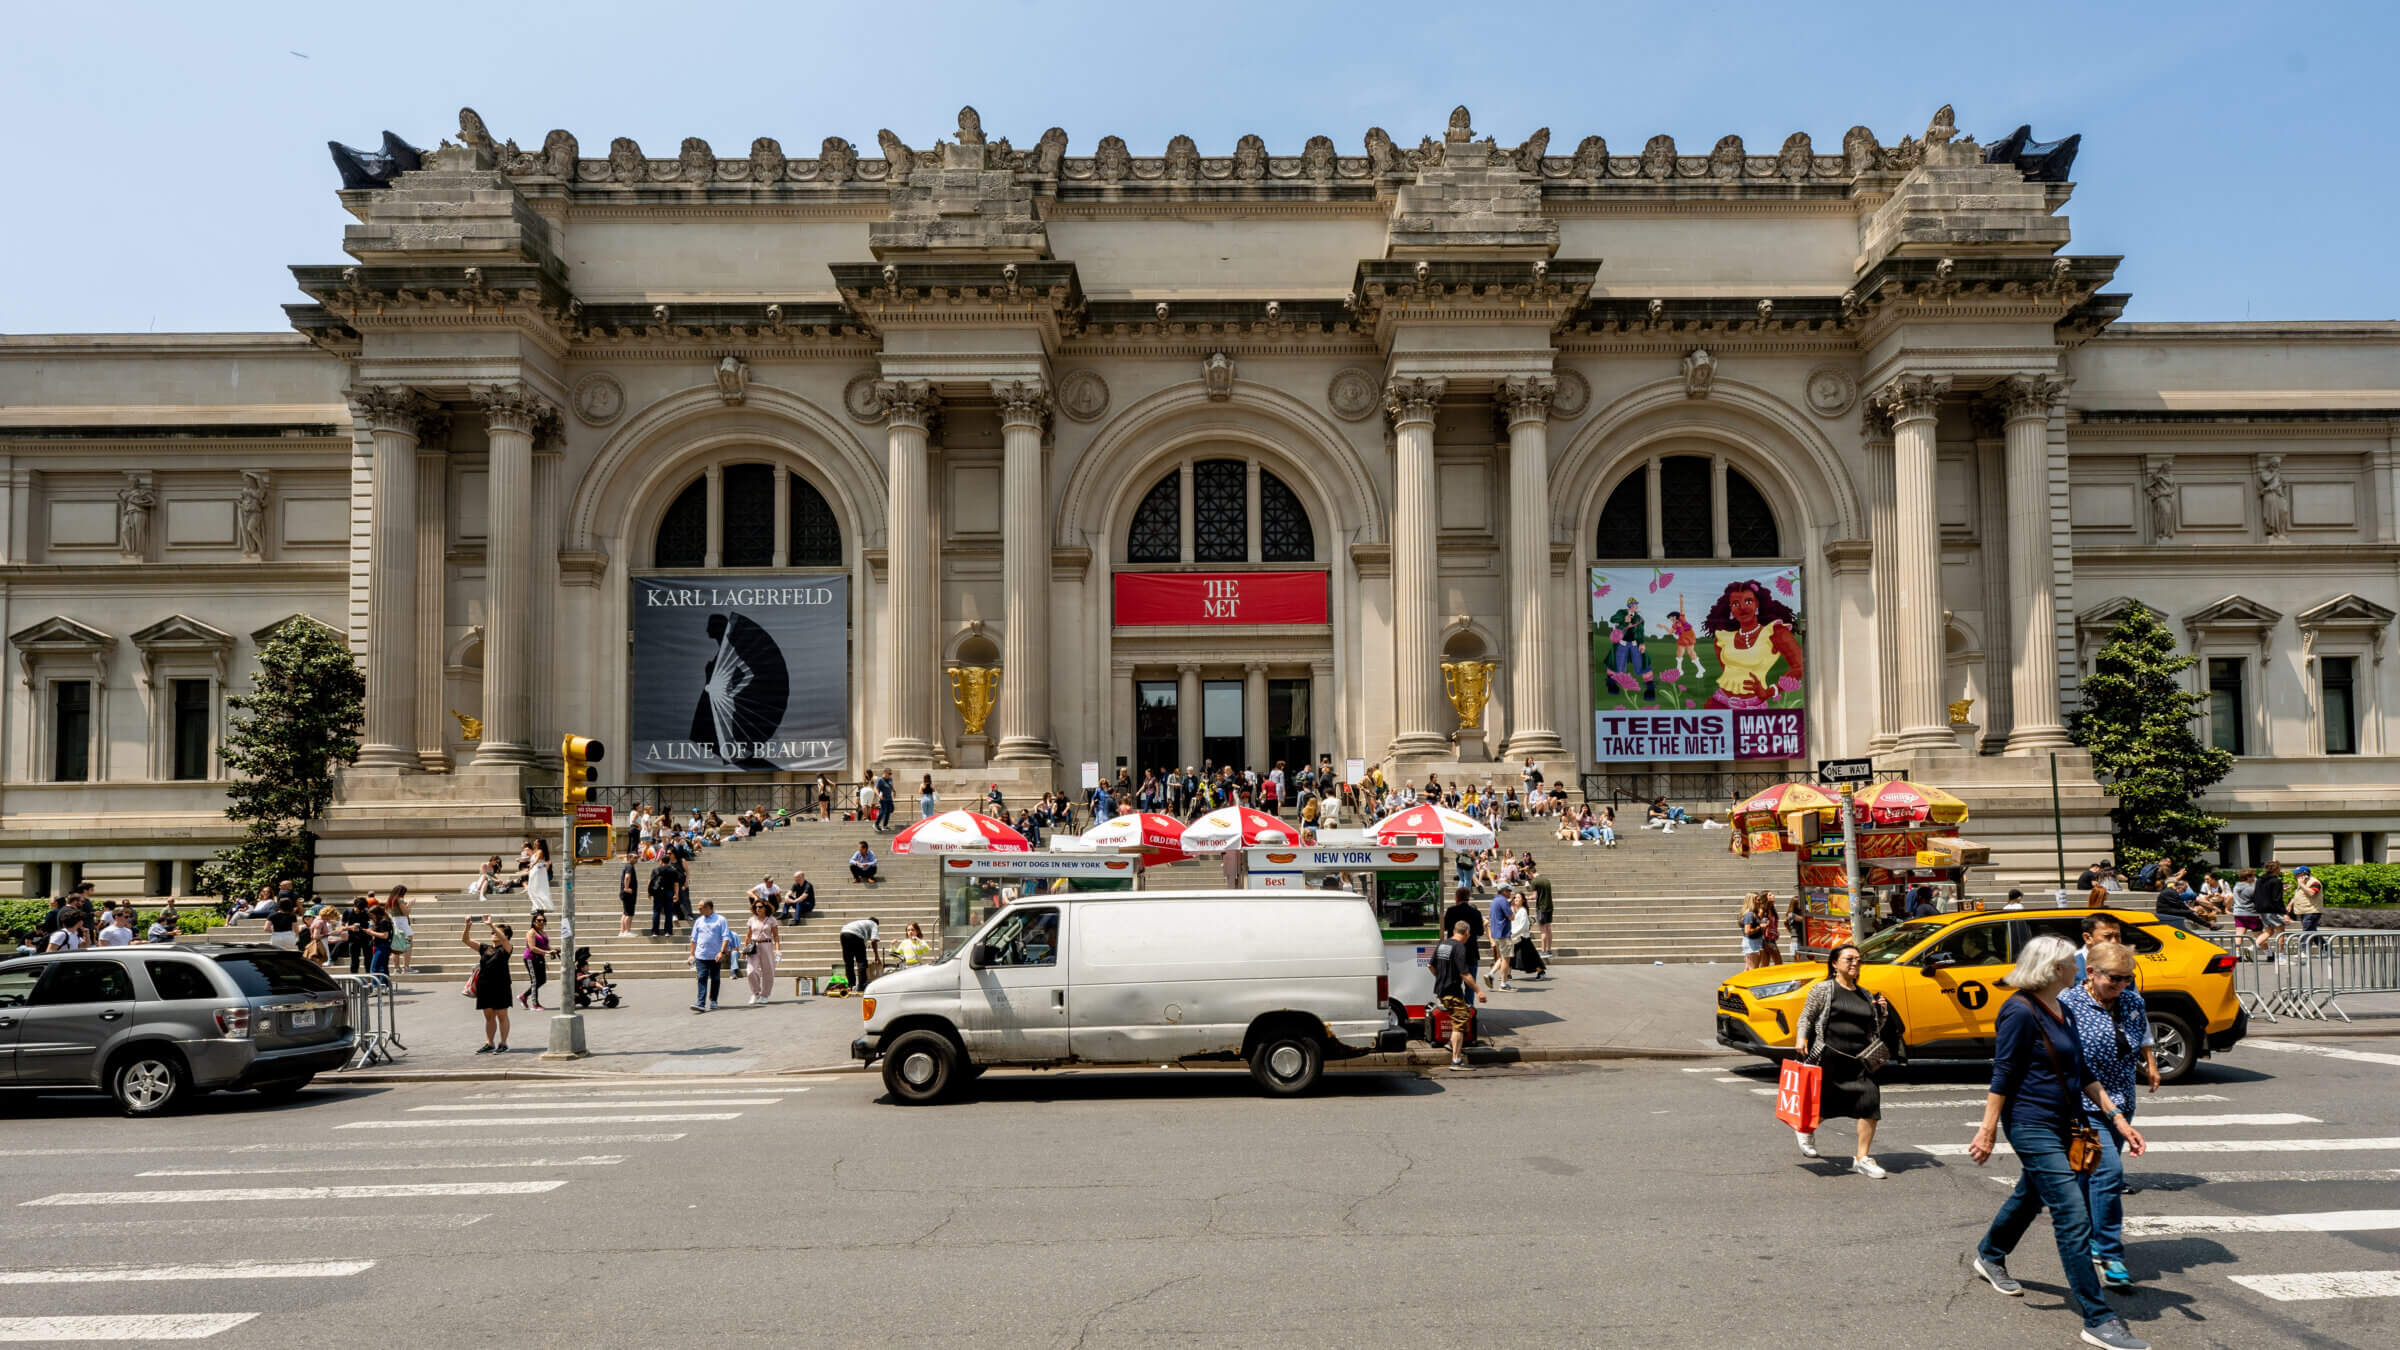 The Metropolitan Museum of Art's collection has 1.5 million pieces of art and historical objects from around the world, spanning 5,000 years of history.